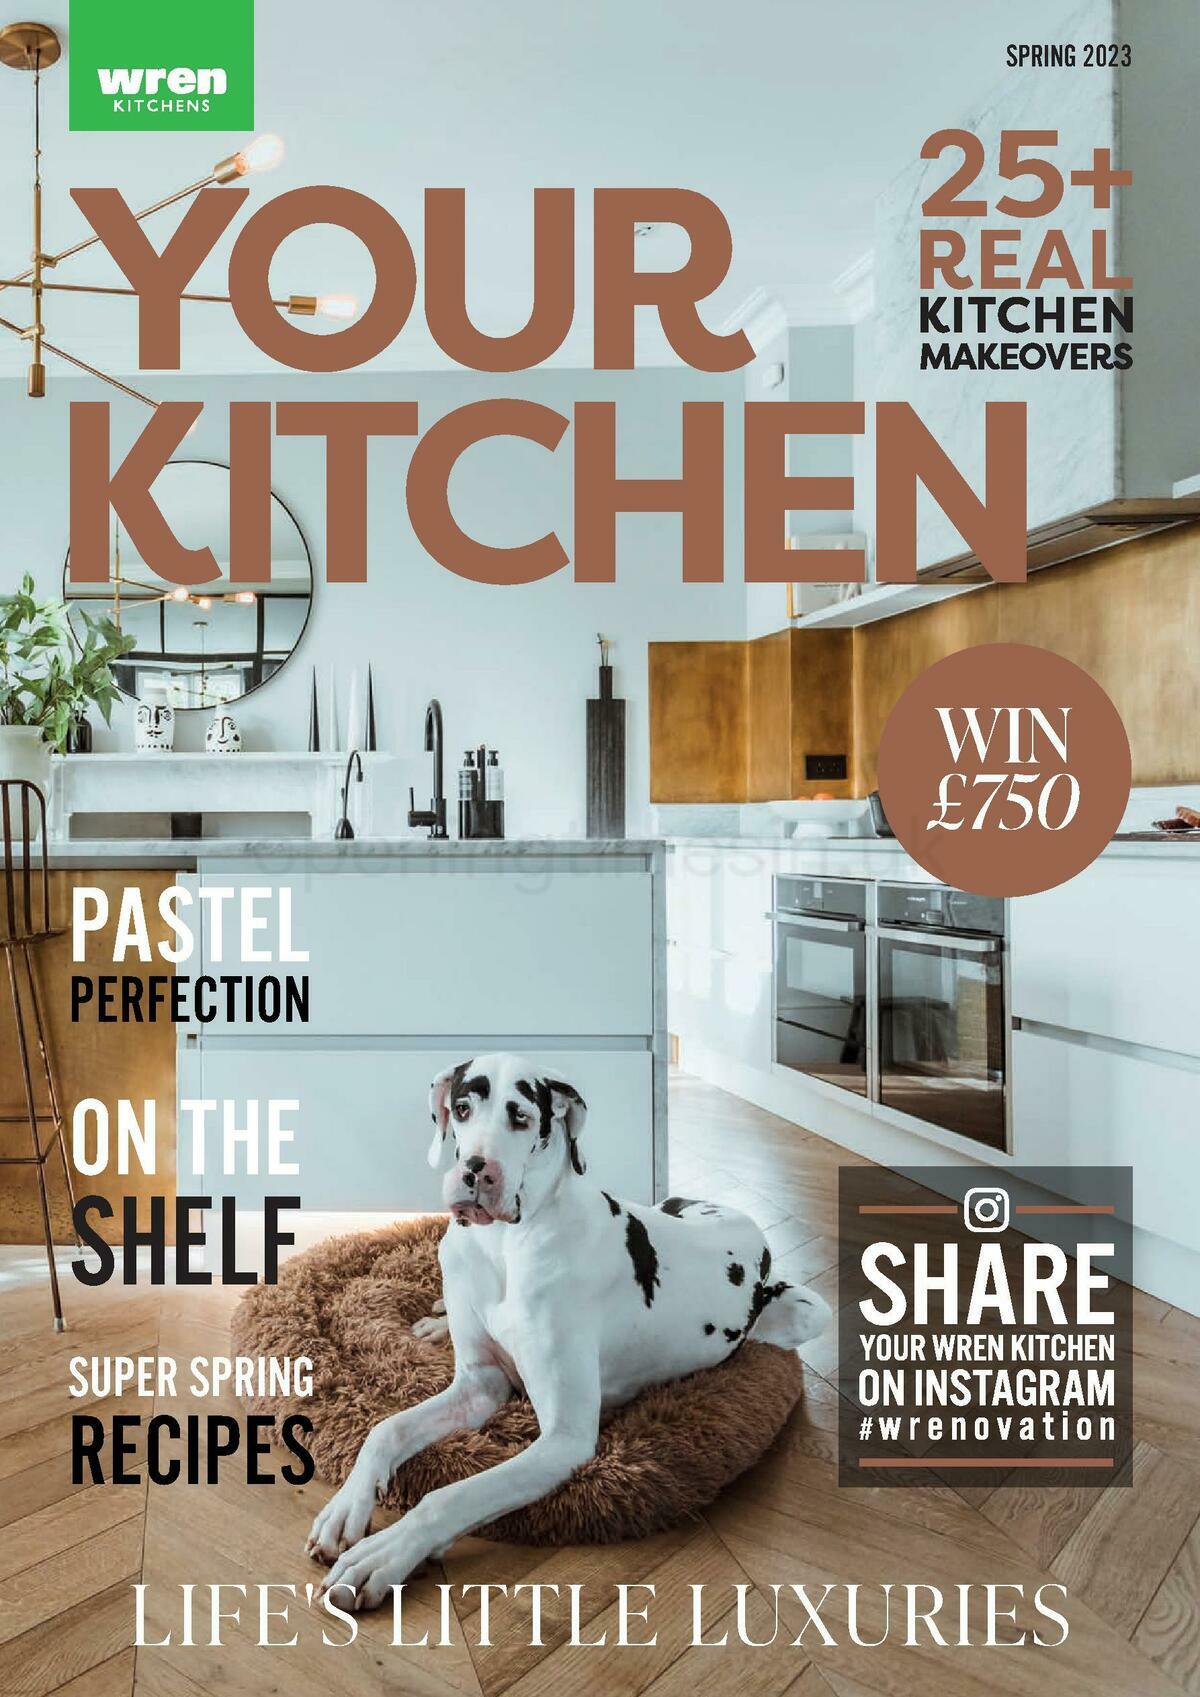 Wren Kitchens Magazine Spring Offers from 15 April